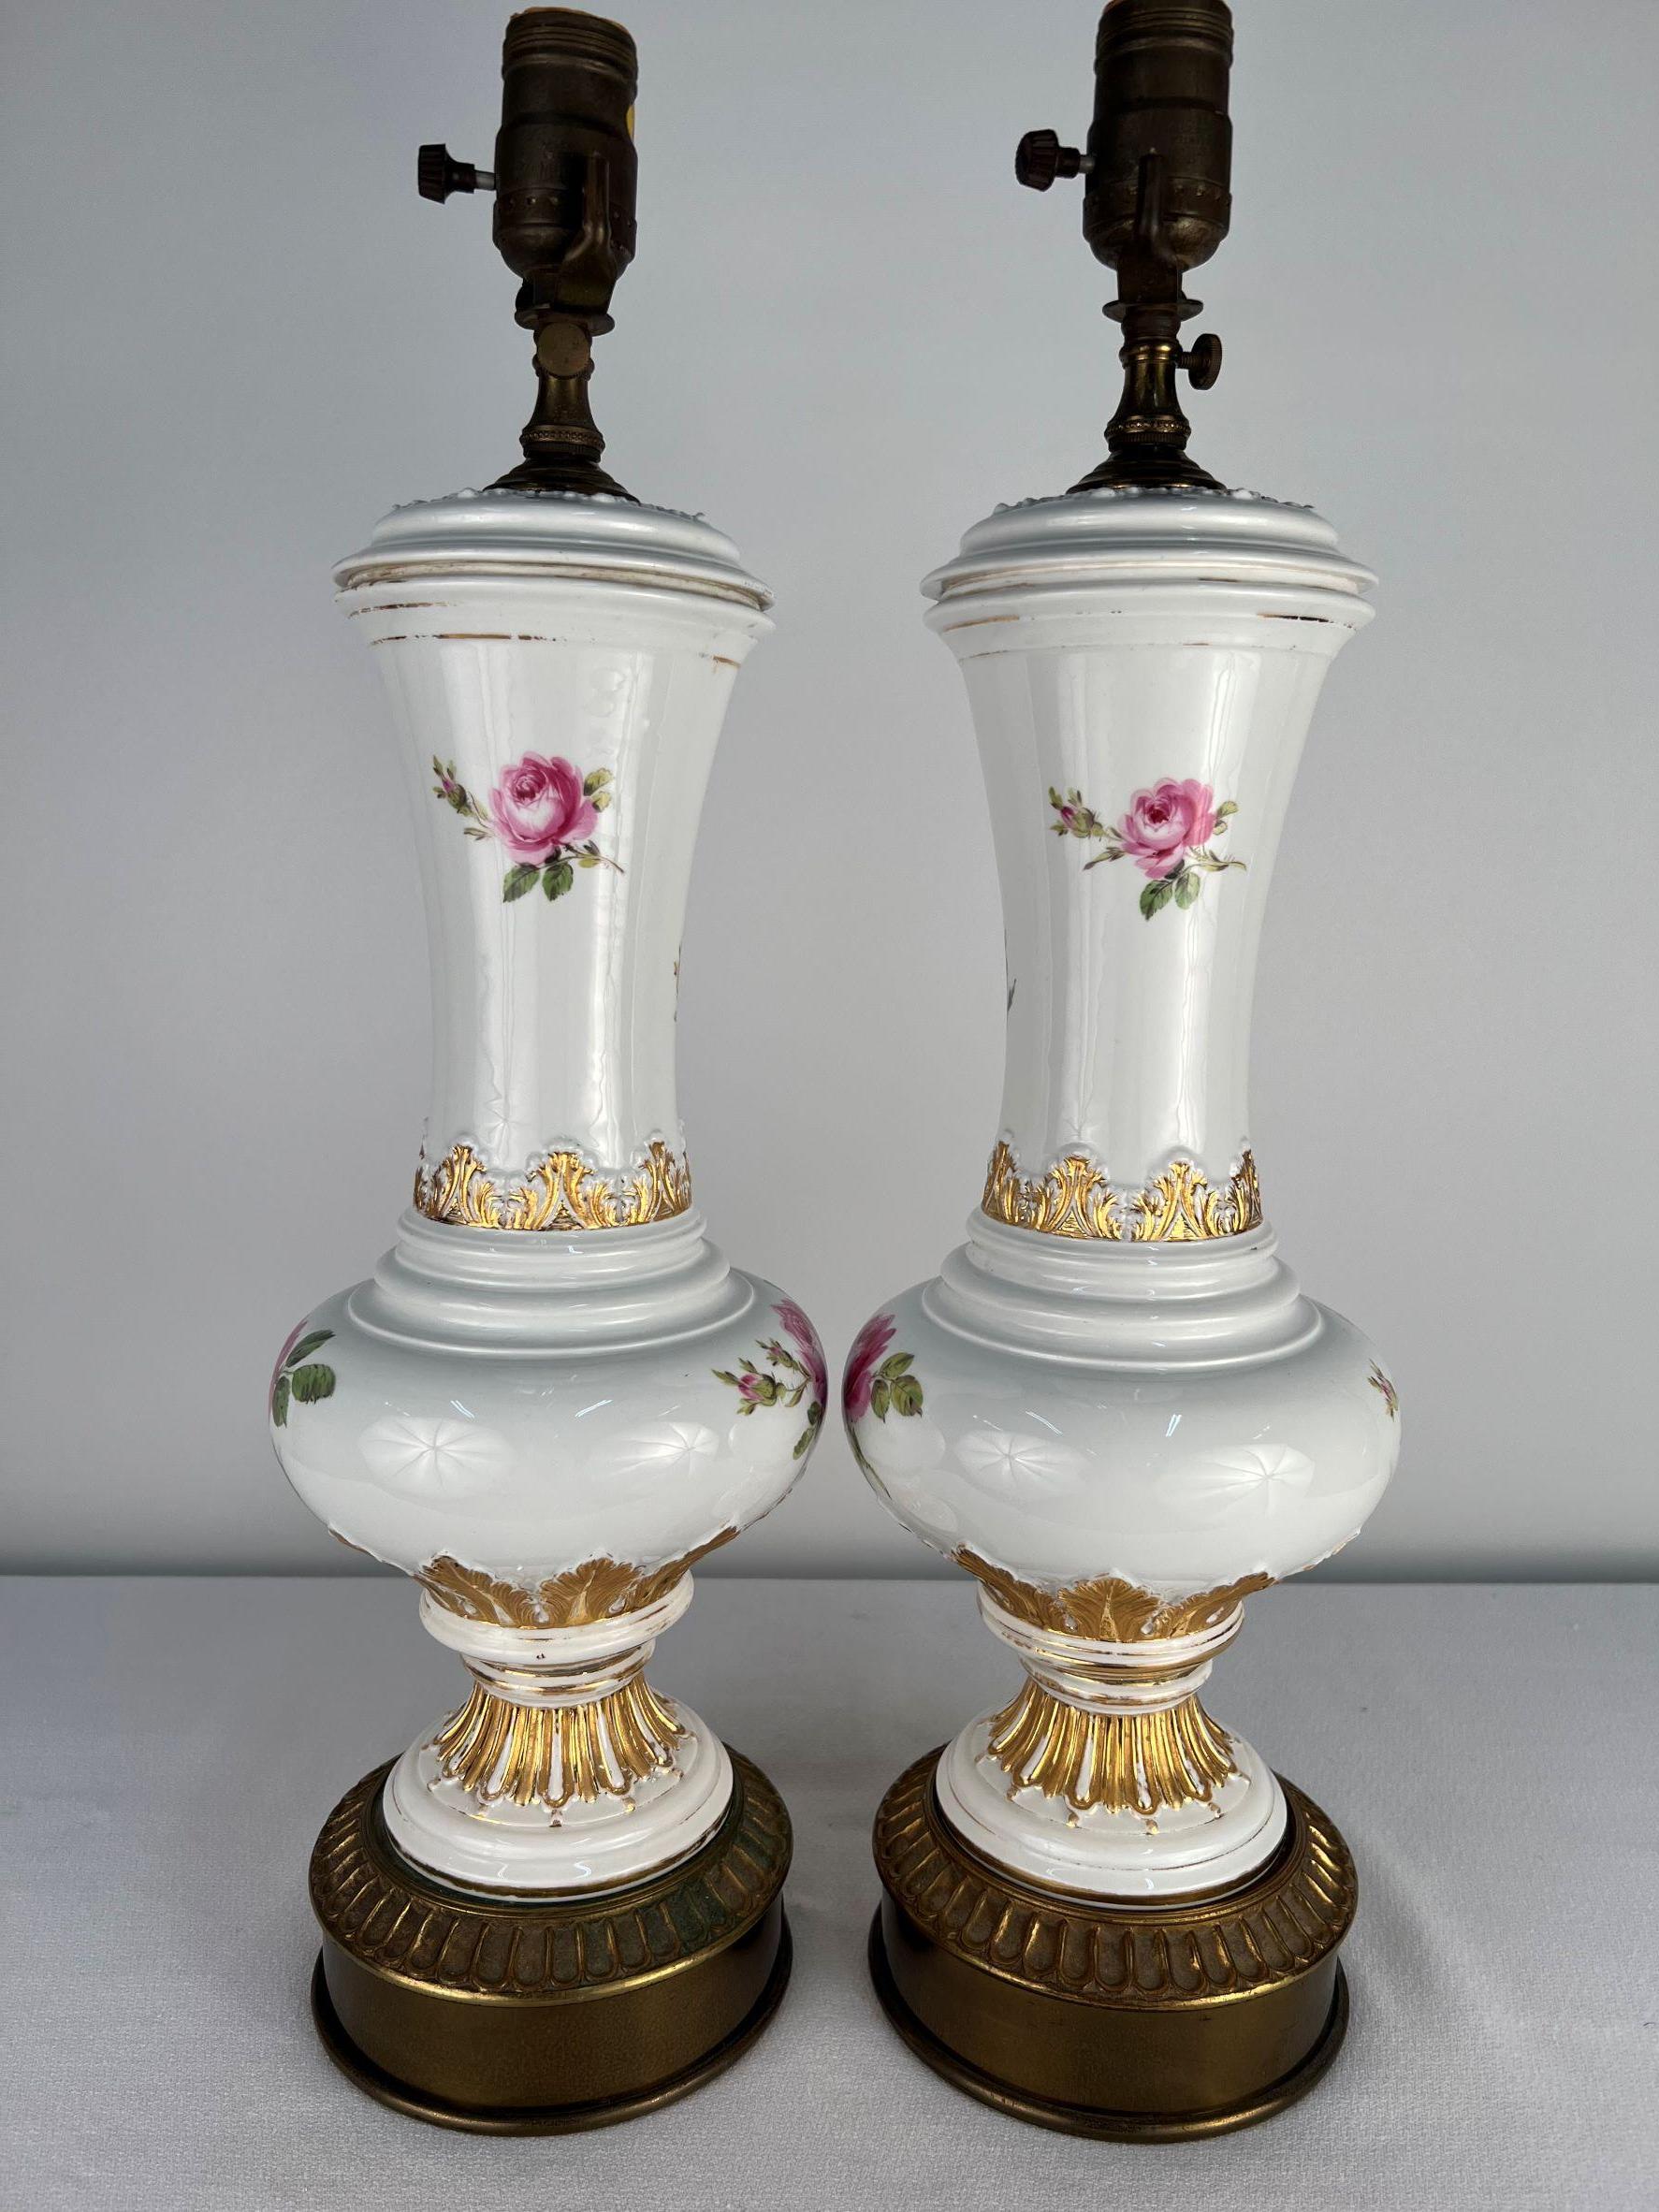 A charming pair of Meissen vases turned into table lamps featuring hand painted red roses, leaves and gilt acanthus details from the estate of Doris Day. One can imagine that Ms. Day and her decorator shopped and chose this particular pair of